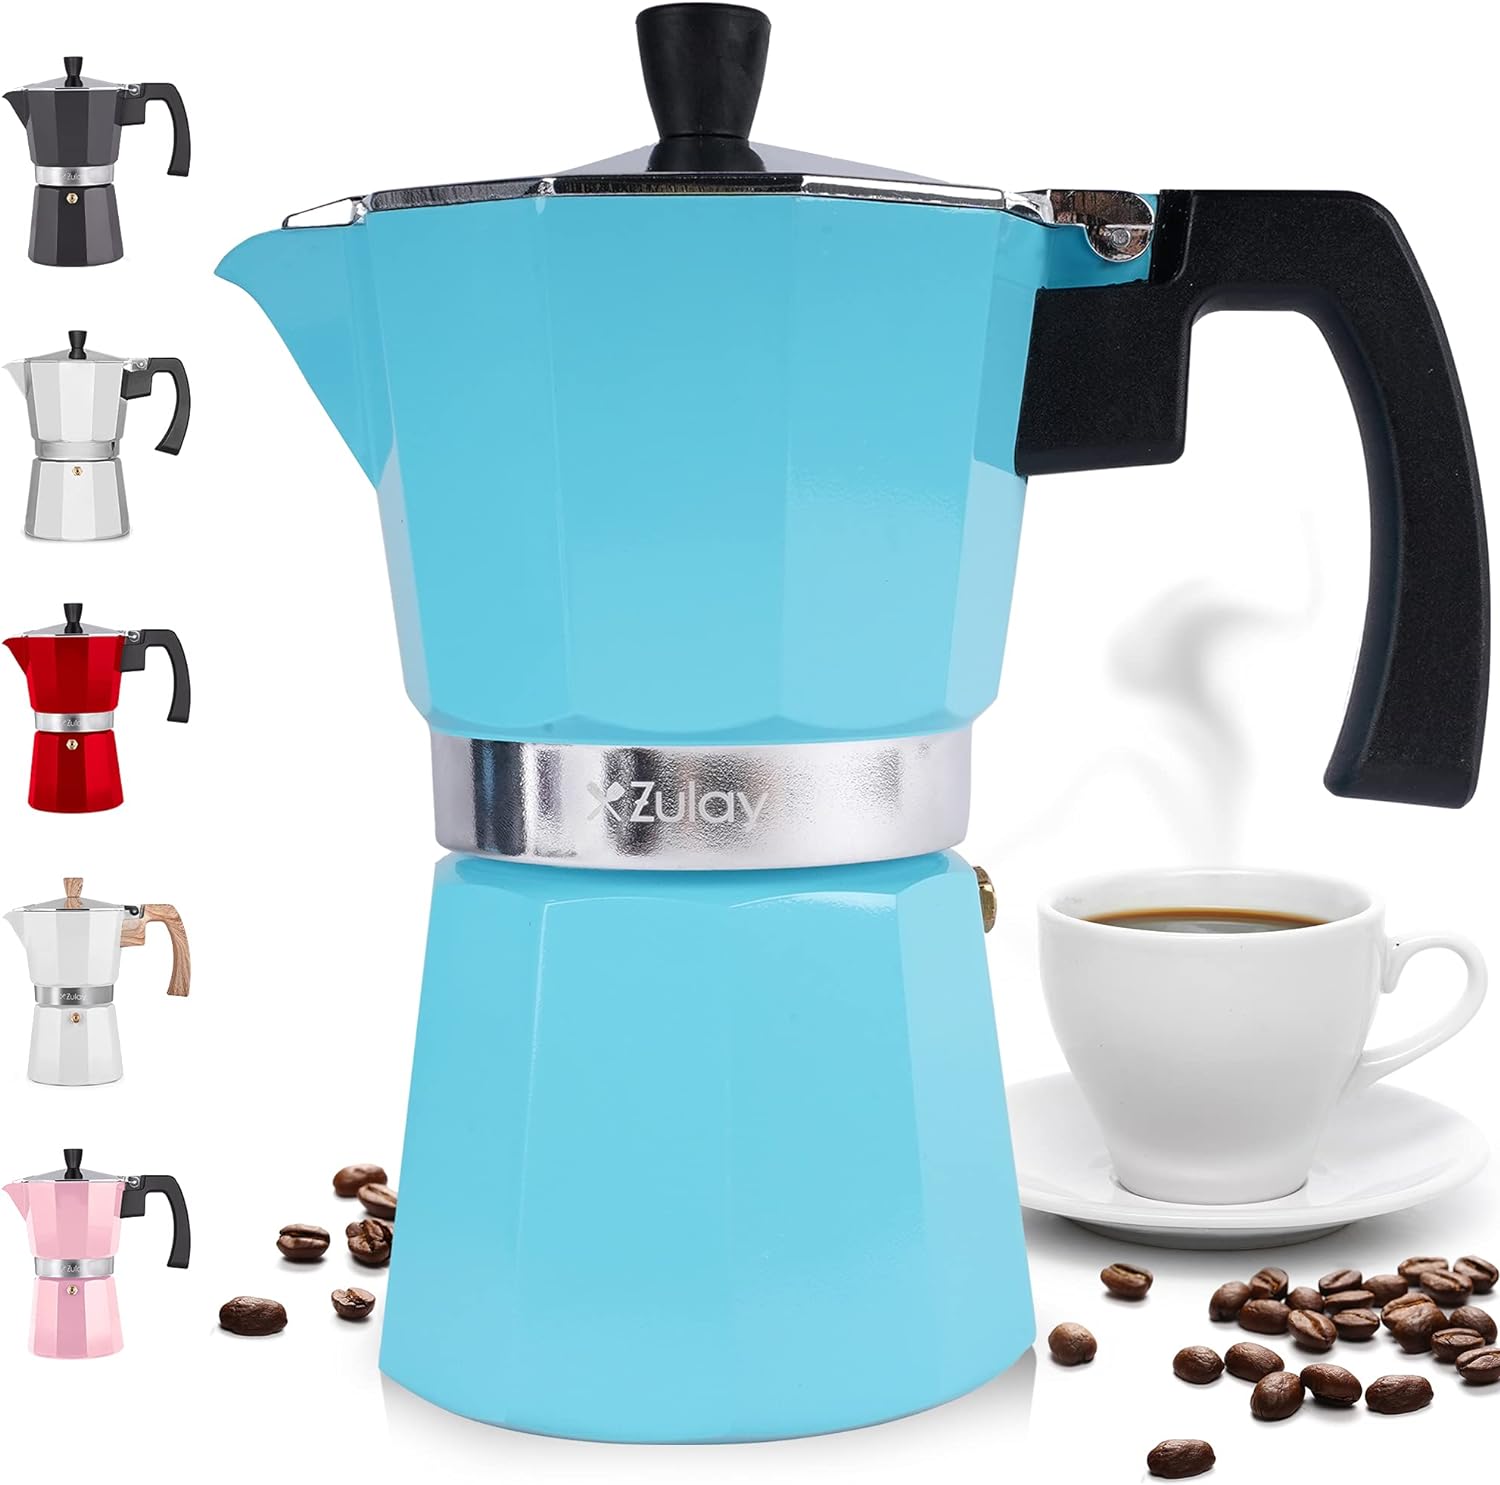 Zulay Classic Stovetop Espresso Maker for Great Flavored Strong Espresso, Classic Italian Style 3 Espresso Cup Moka Pot, Makes Delicious Coffee, Easy to Operate  Quick Cleanup Pot (Blue)